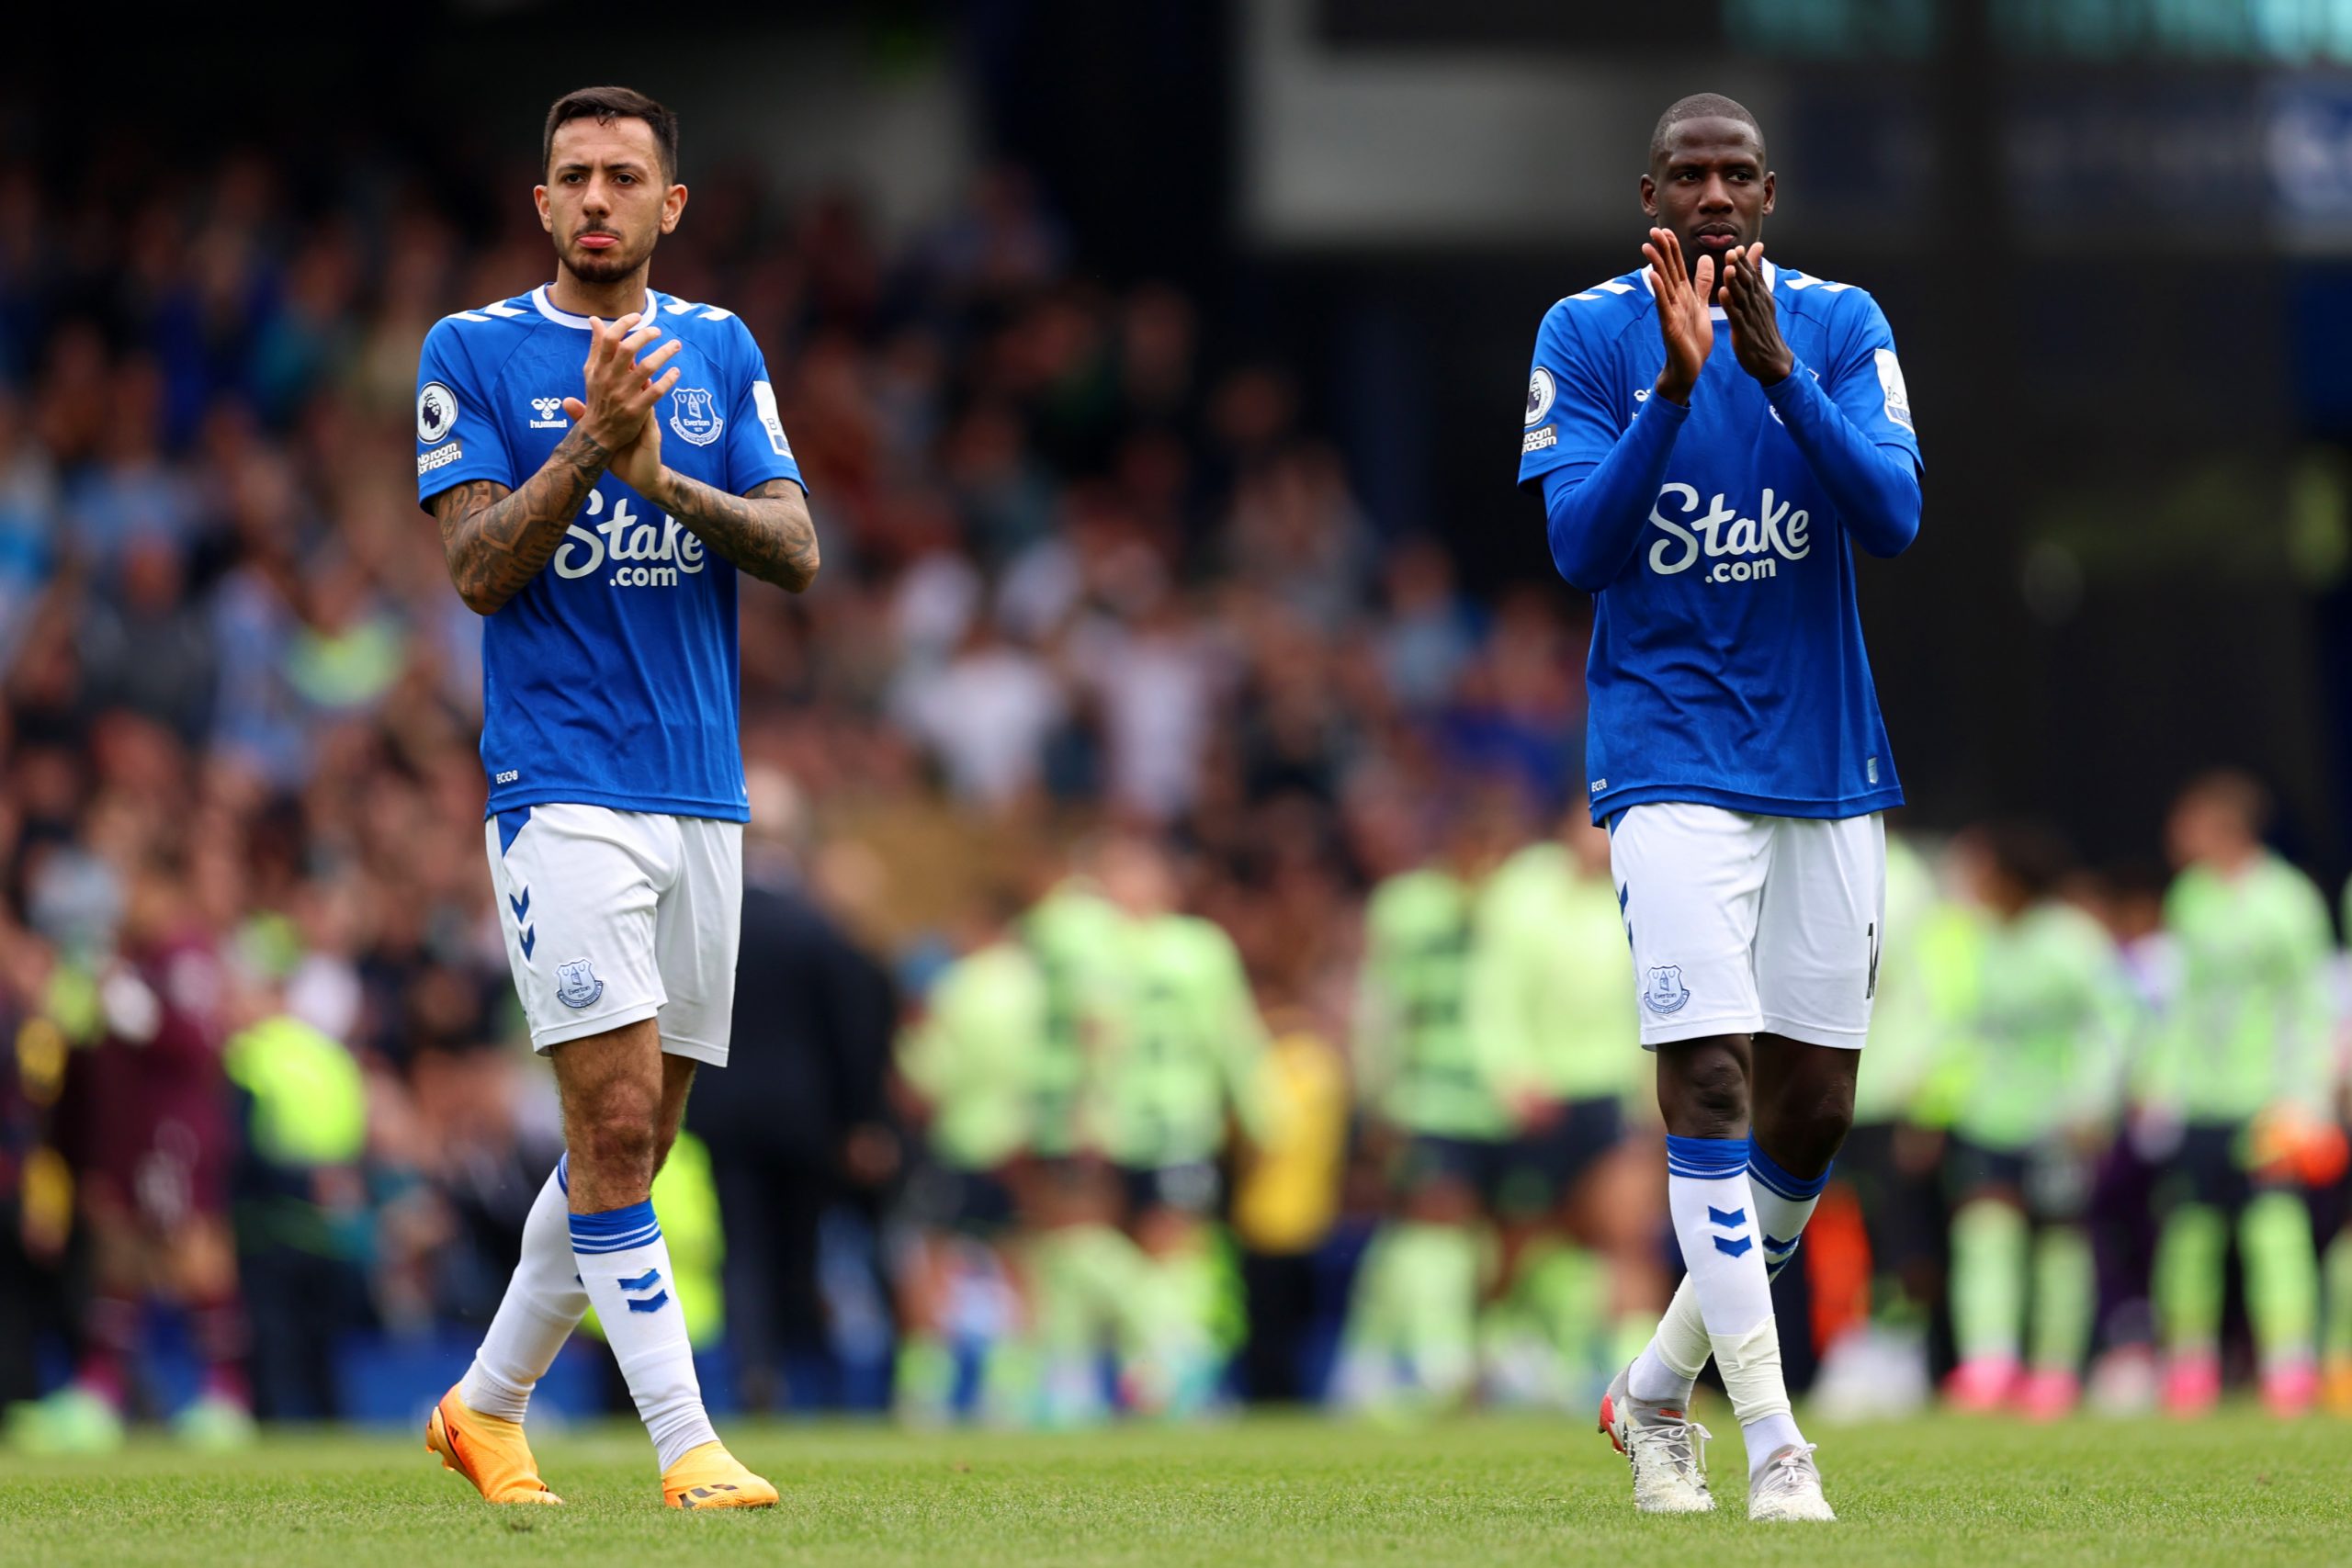 LIVERPOOL, ENGLAND - MAY 14: Dwight McNeil and Abdoulaye Doucoure of Everton applaud the fans after the team's defeat during the Premier League match between Everton FC and Manchester City at Goodison Park on May 14, 2023 in Liverpool, England. (Photo by Clive Brunskill/Getty Images)